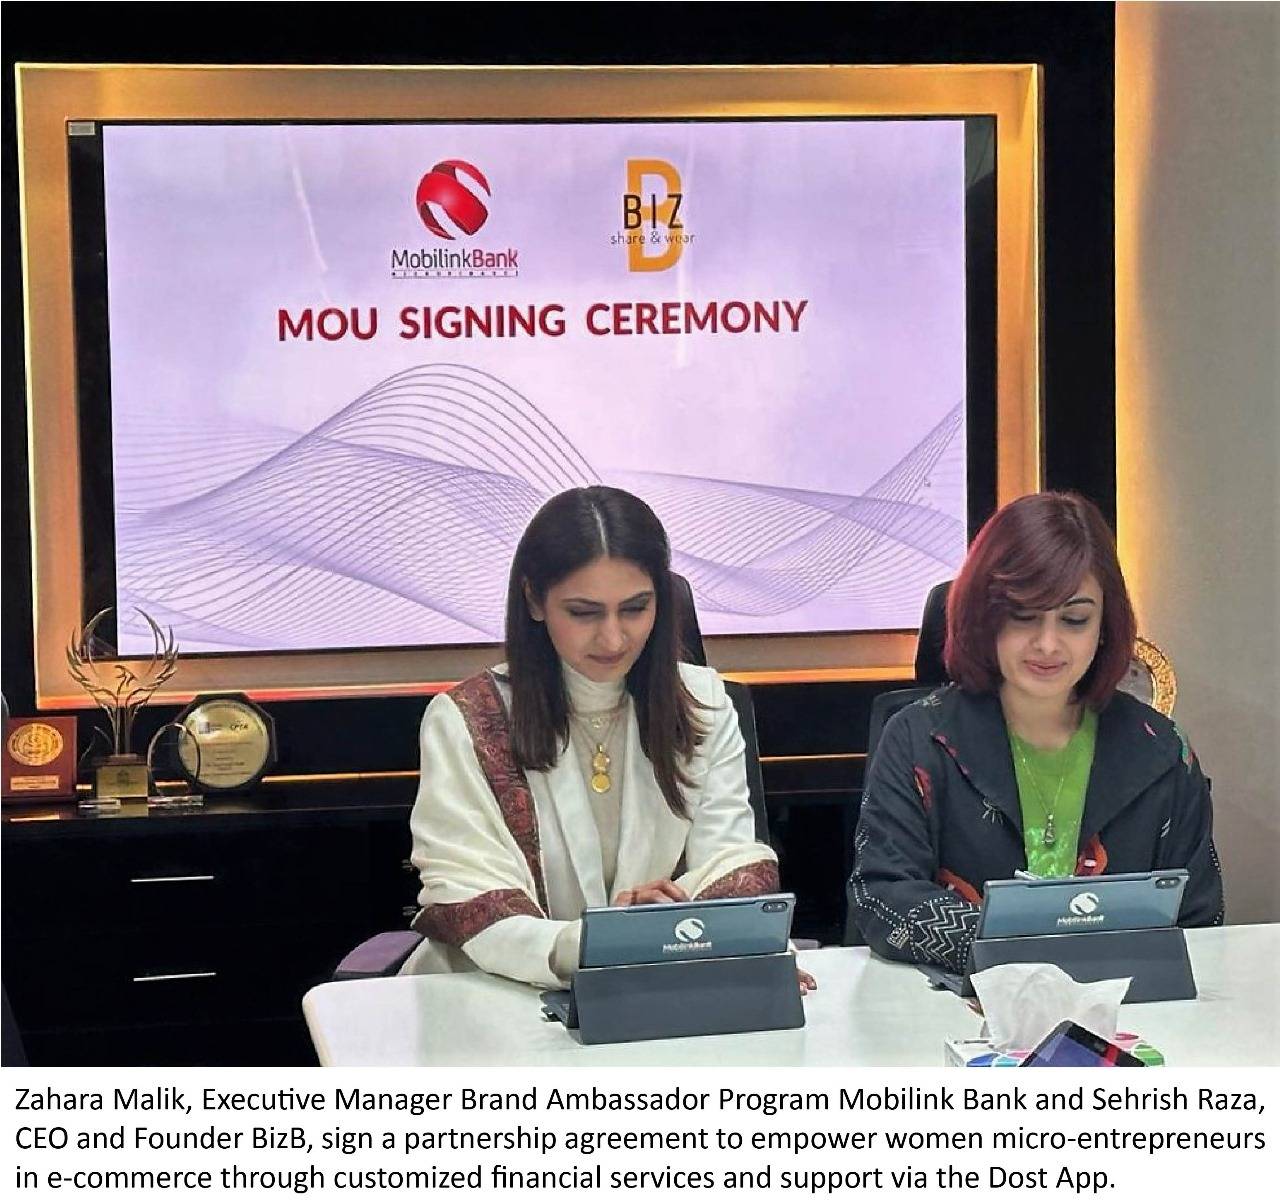 Mobilink Bank and BizB Join Forces to Drive Financial Inclusion and Empower Women Micro-Entrepreneurs